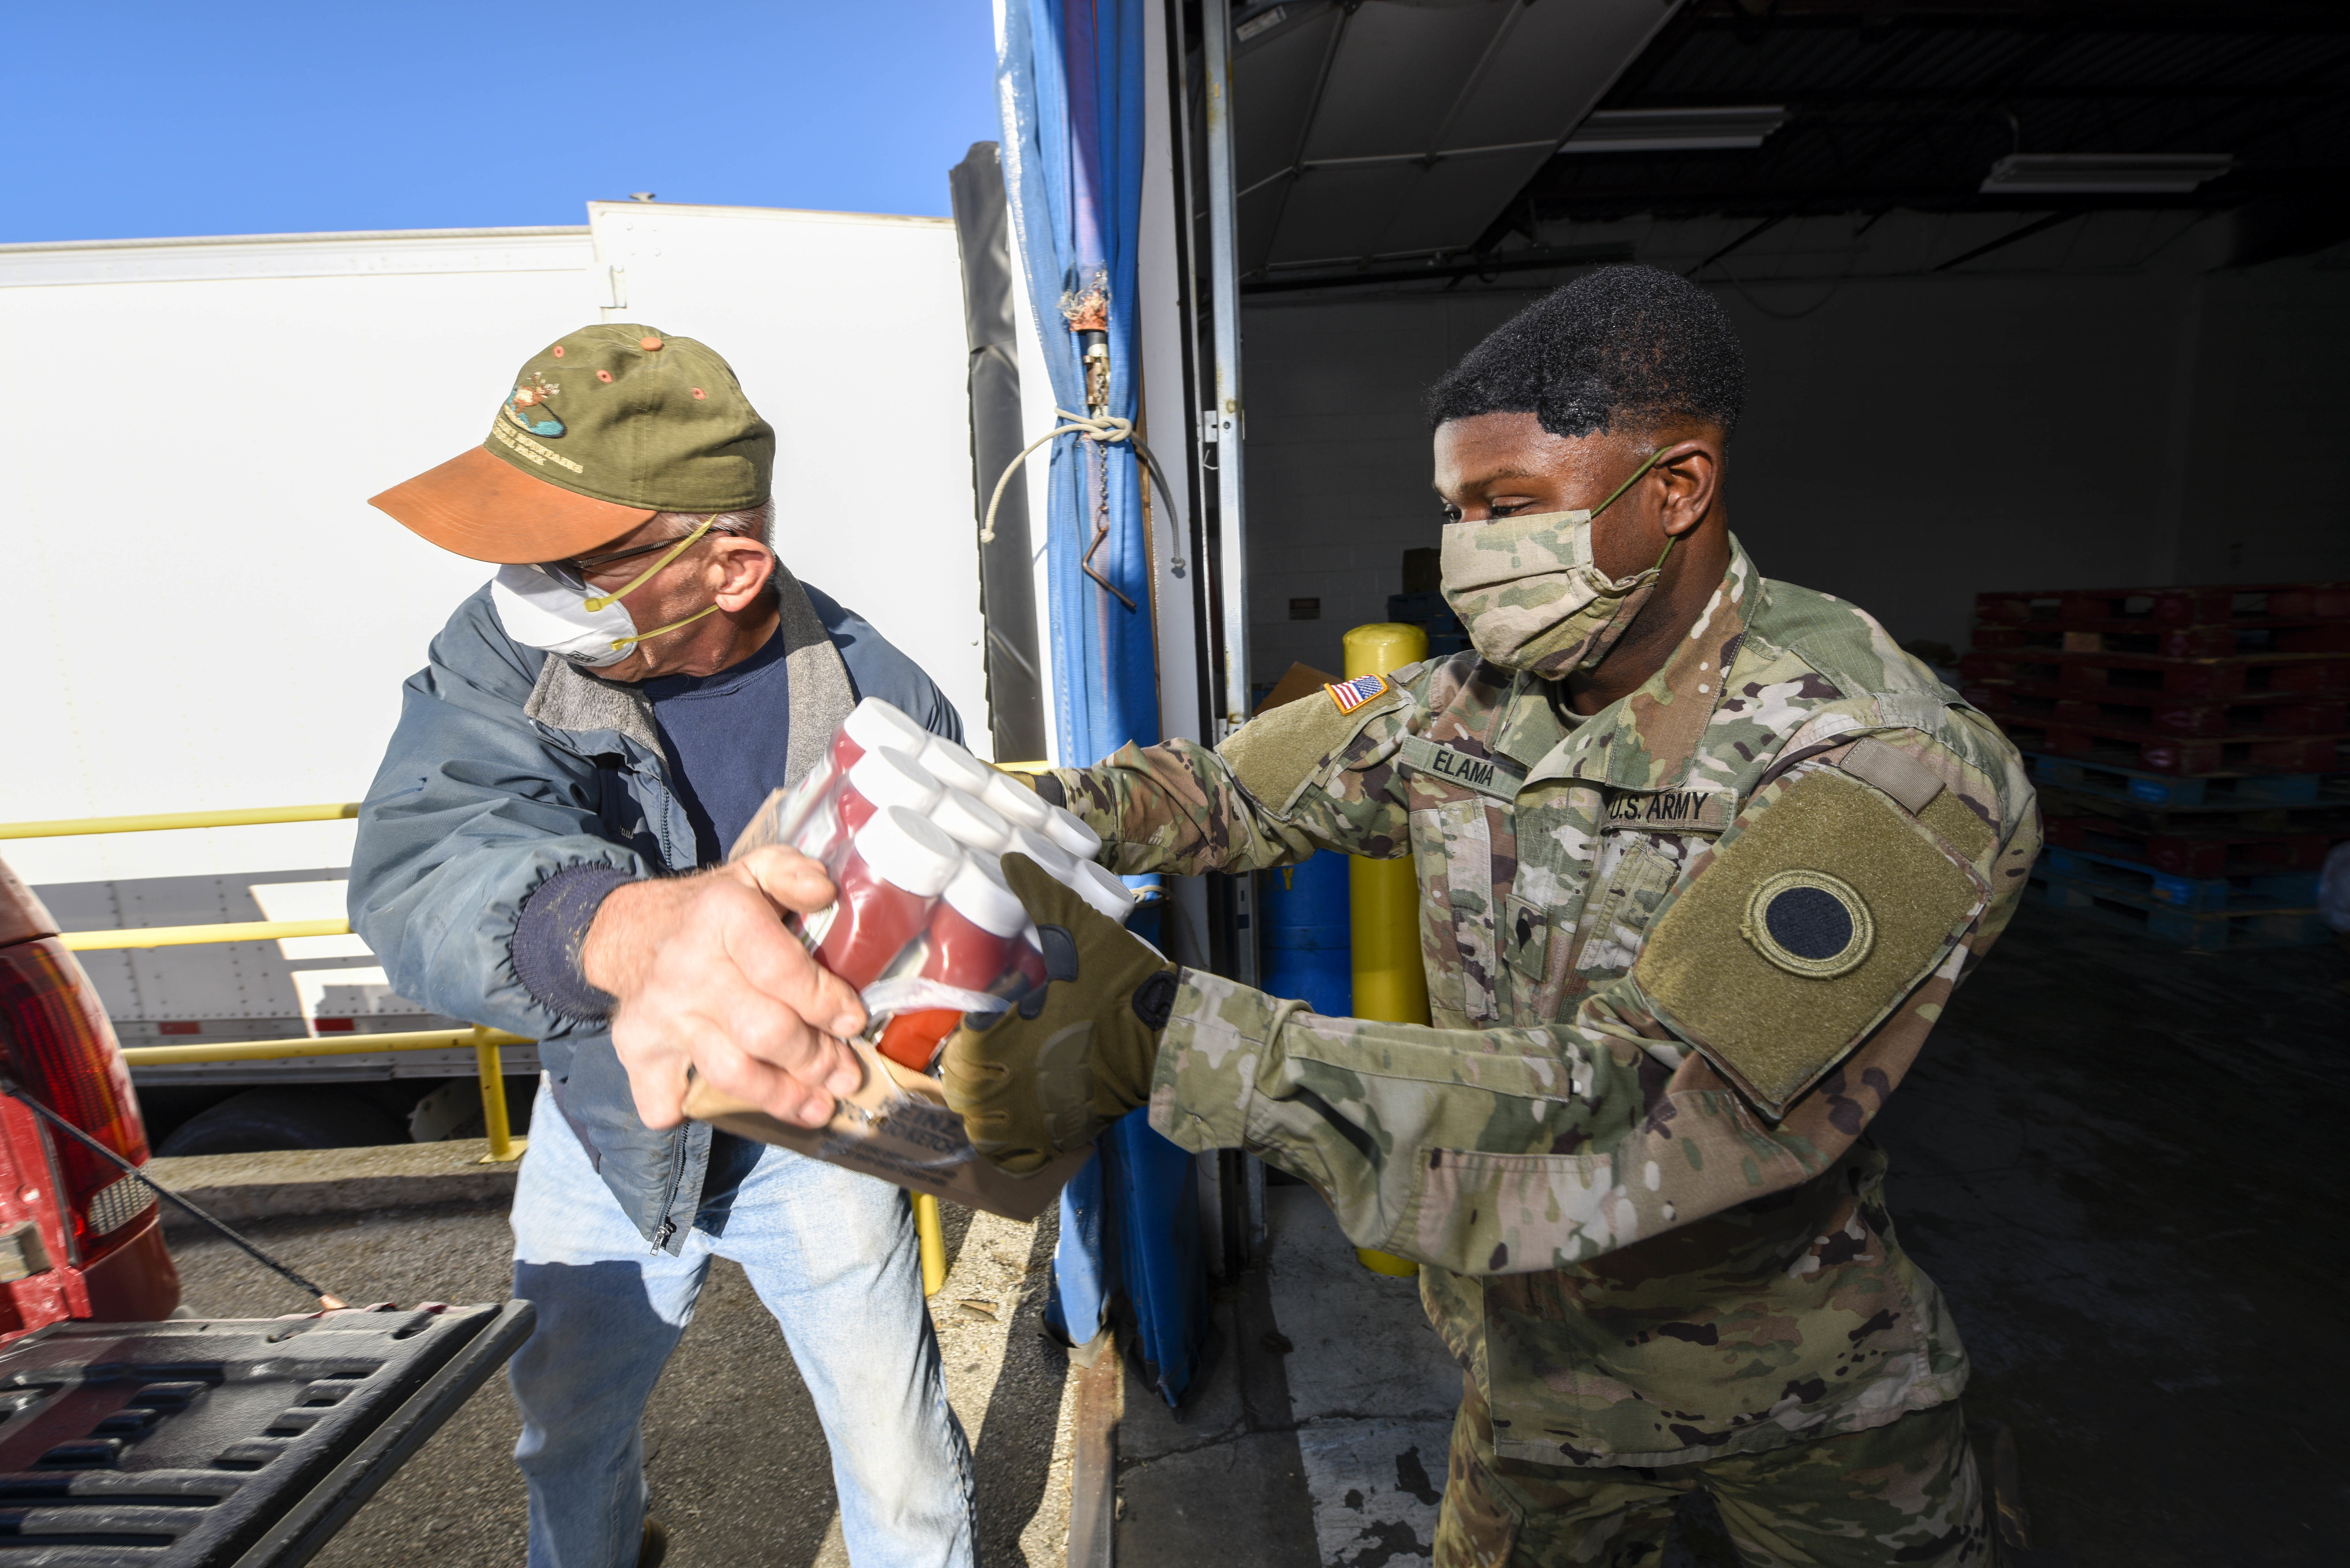 Soldier hands groceries to man to load in back of truck.